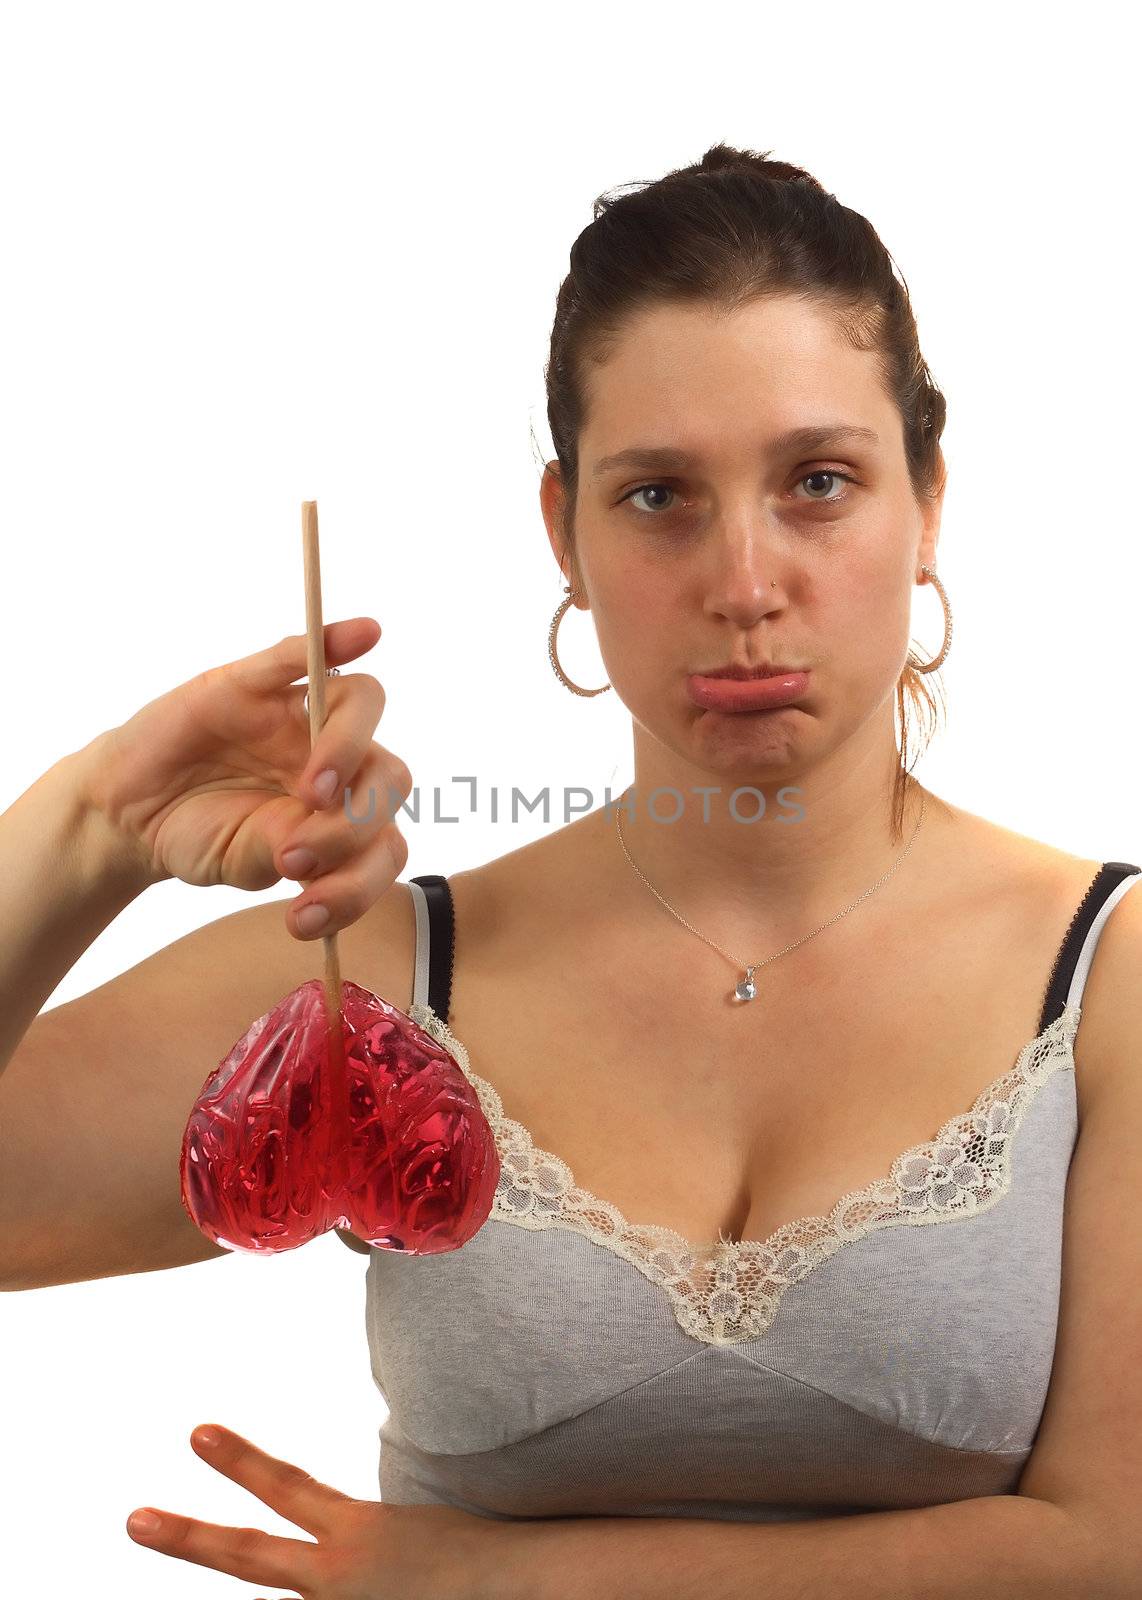 Sad young woman hold heart shaped lollipop upside down by totony